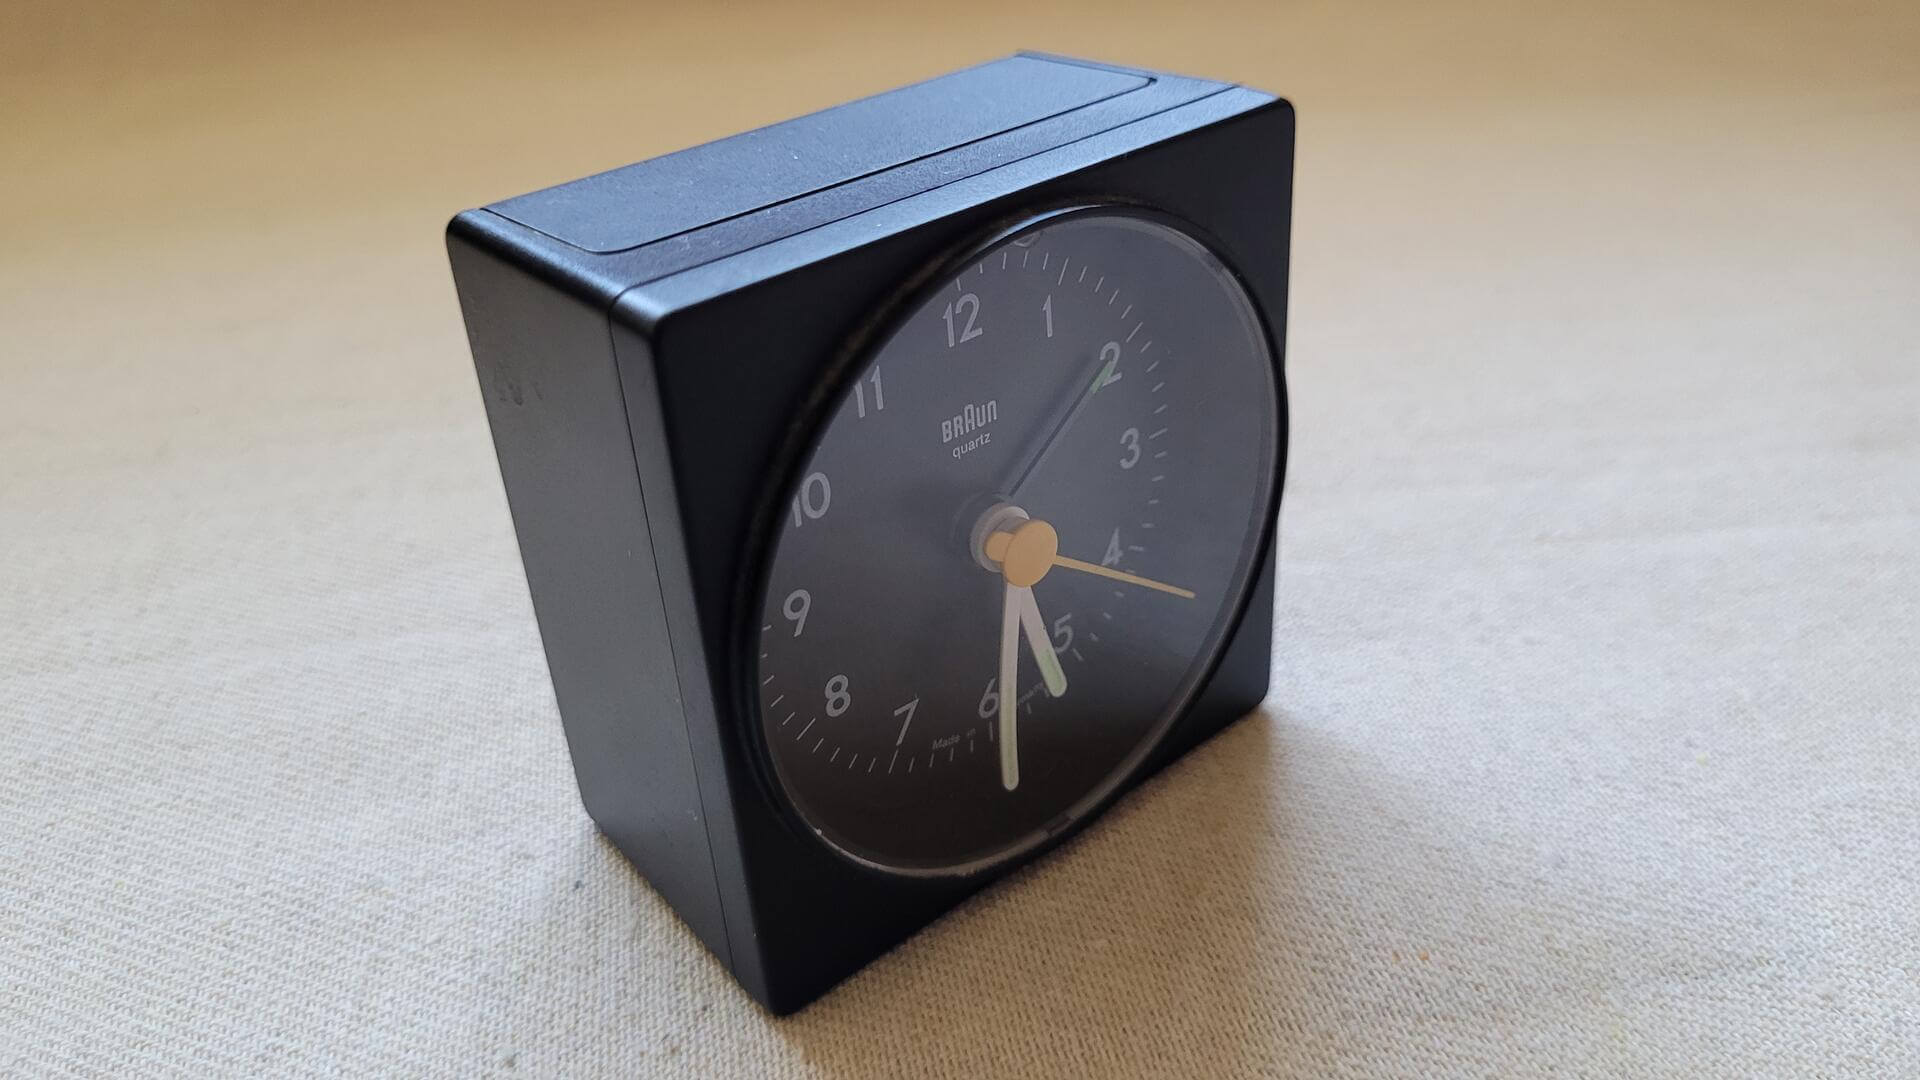 Rare retro 1987 Braun AG 4746 AB1 travel alarm analog clock designed by Dietrich Lubs under the supervision of Dieter Rams who was the head of design at Braun from 1961–1995. This vintage made in Germany collectible mid century table clock